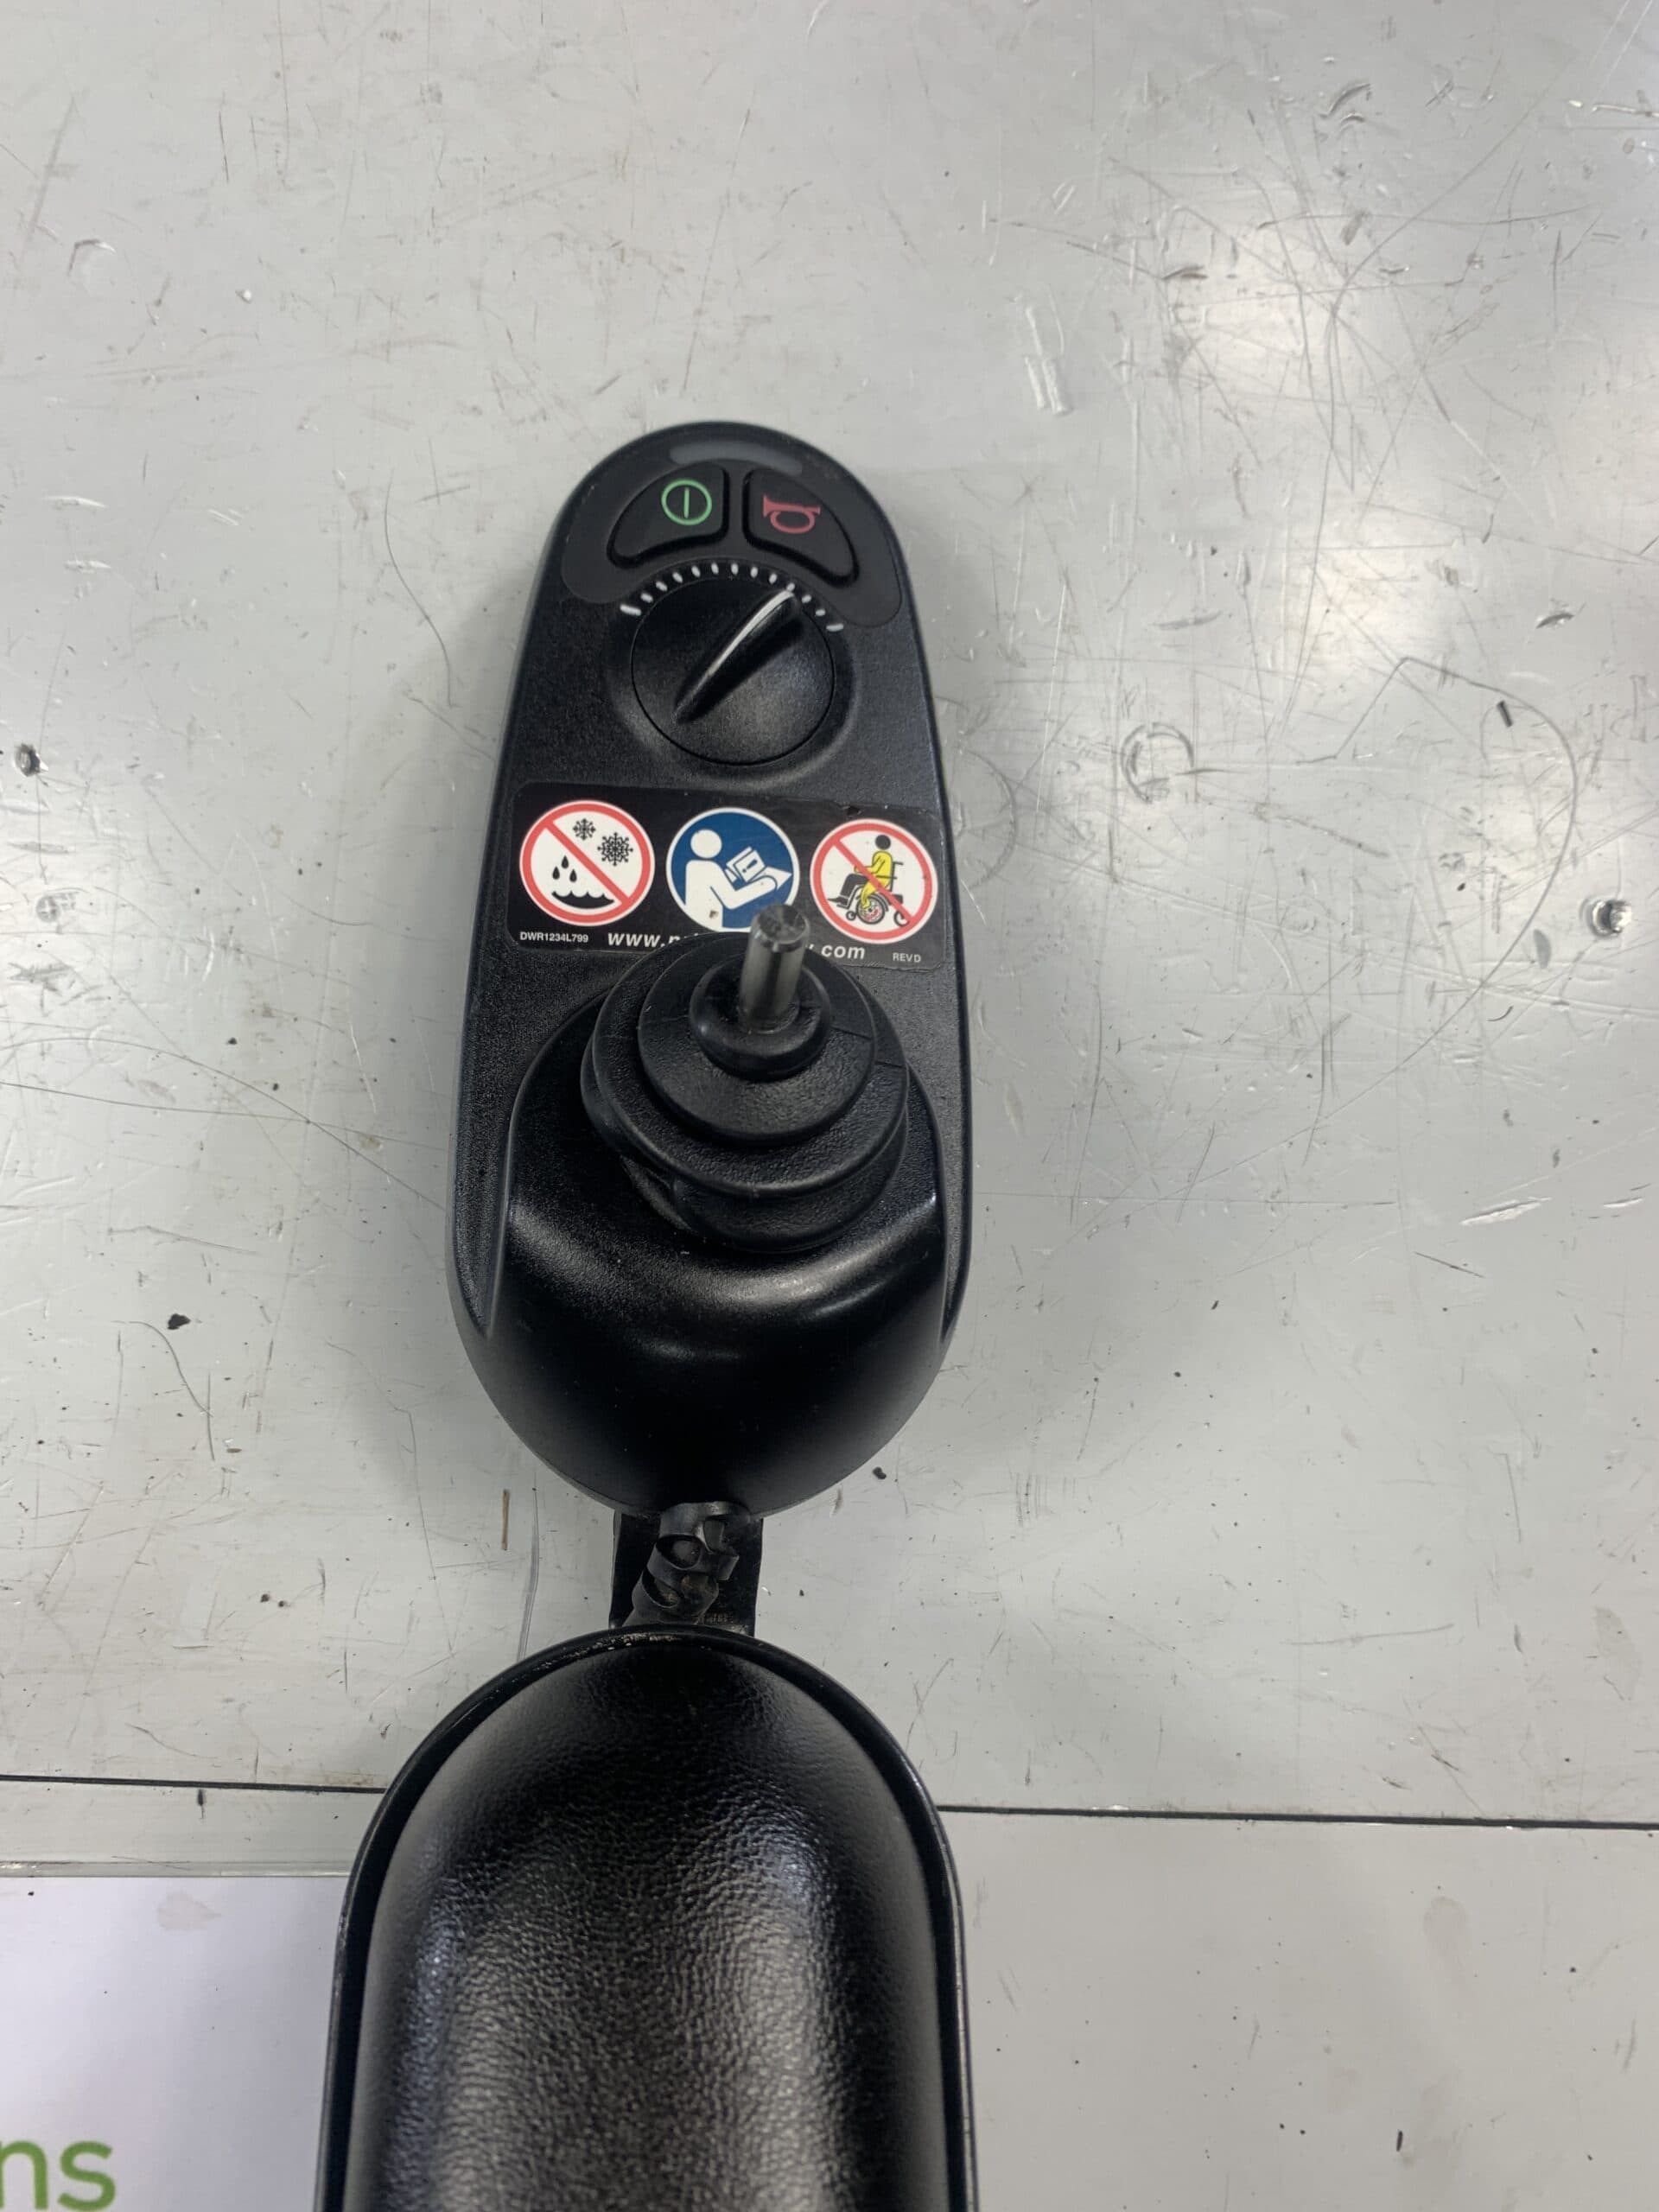 Pride Go Chair Handset with Pride Go chair right side arm